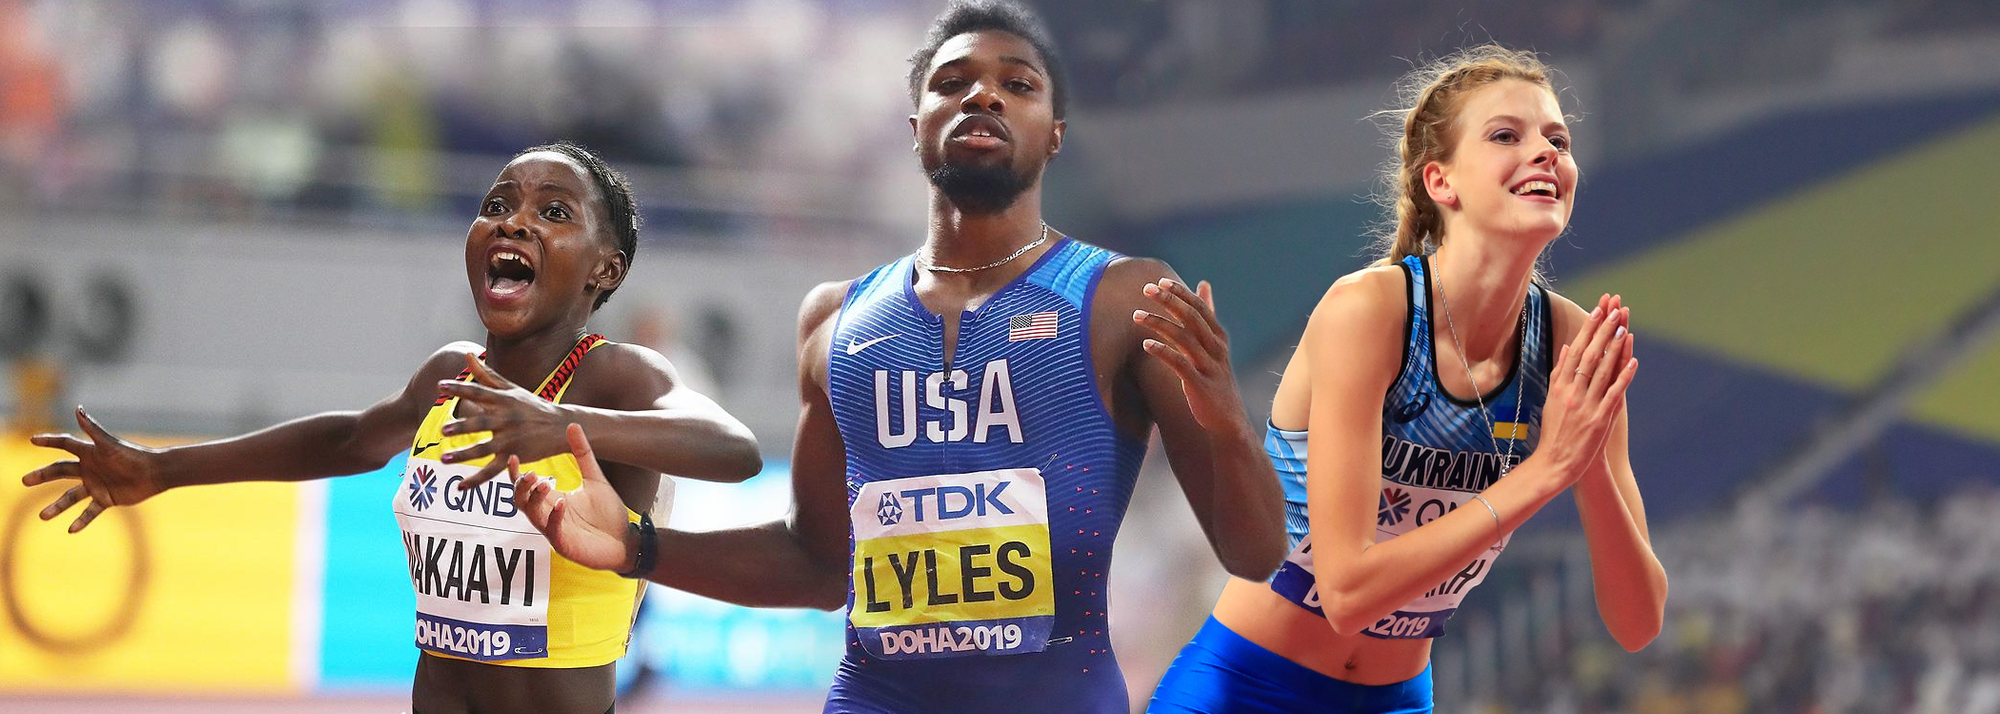 Some of the biggest names in the sport have cemented their legendary status by adding to their career medal haul at the World Athletics Championships Doha 2019.